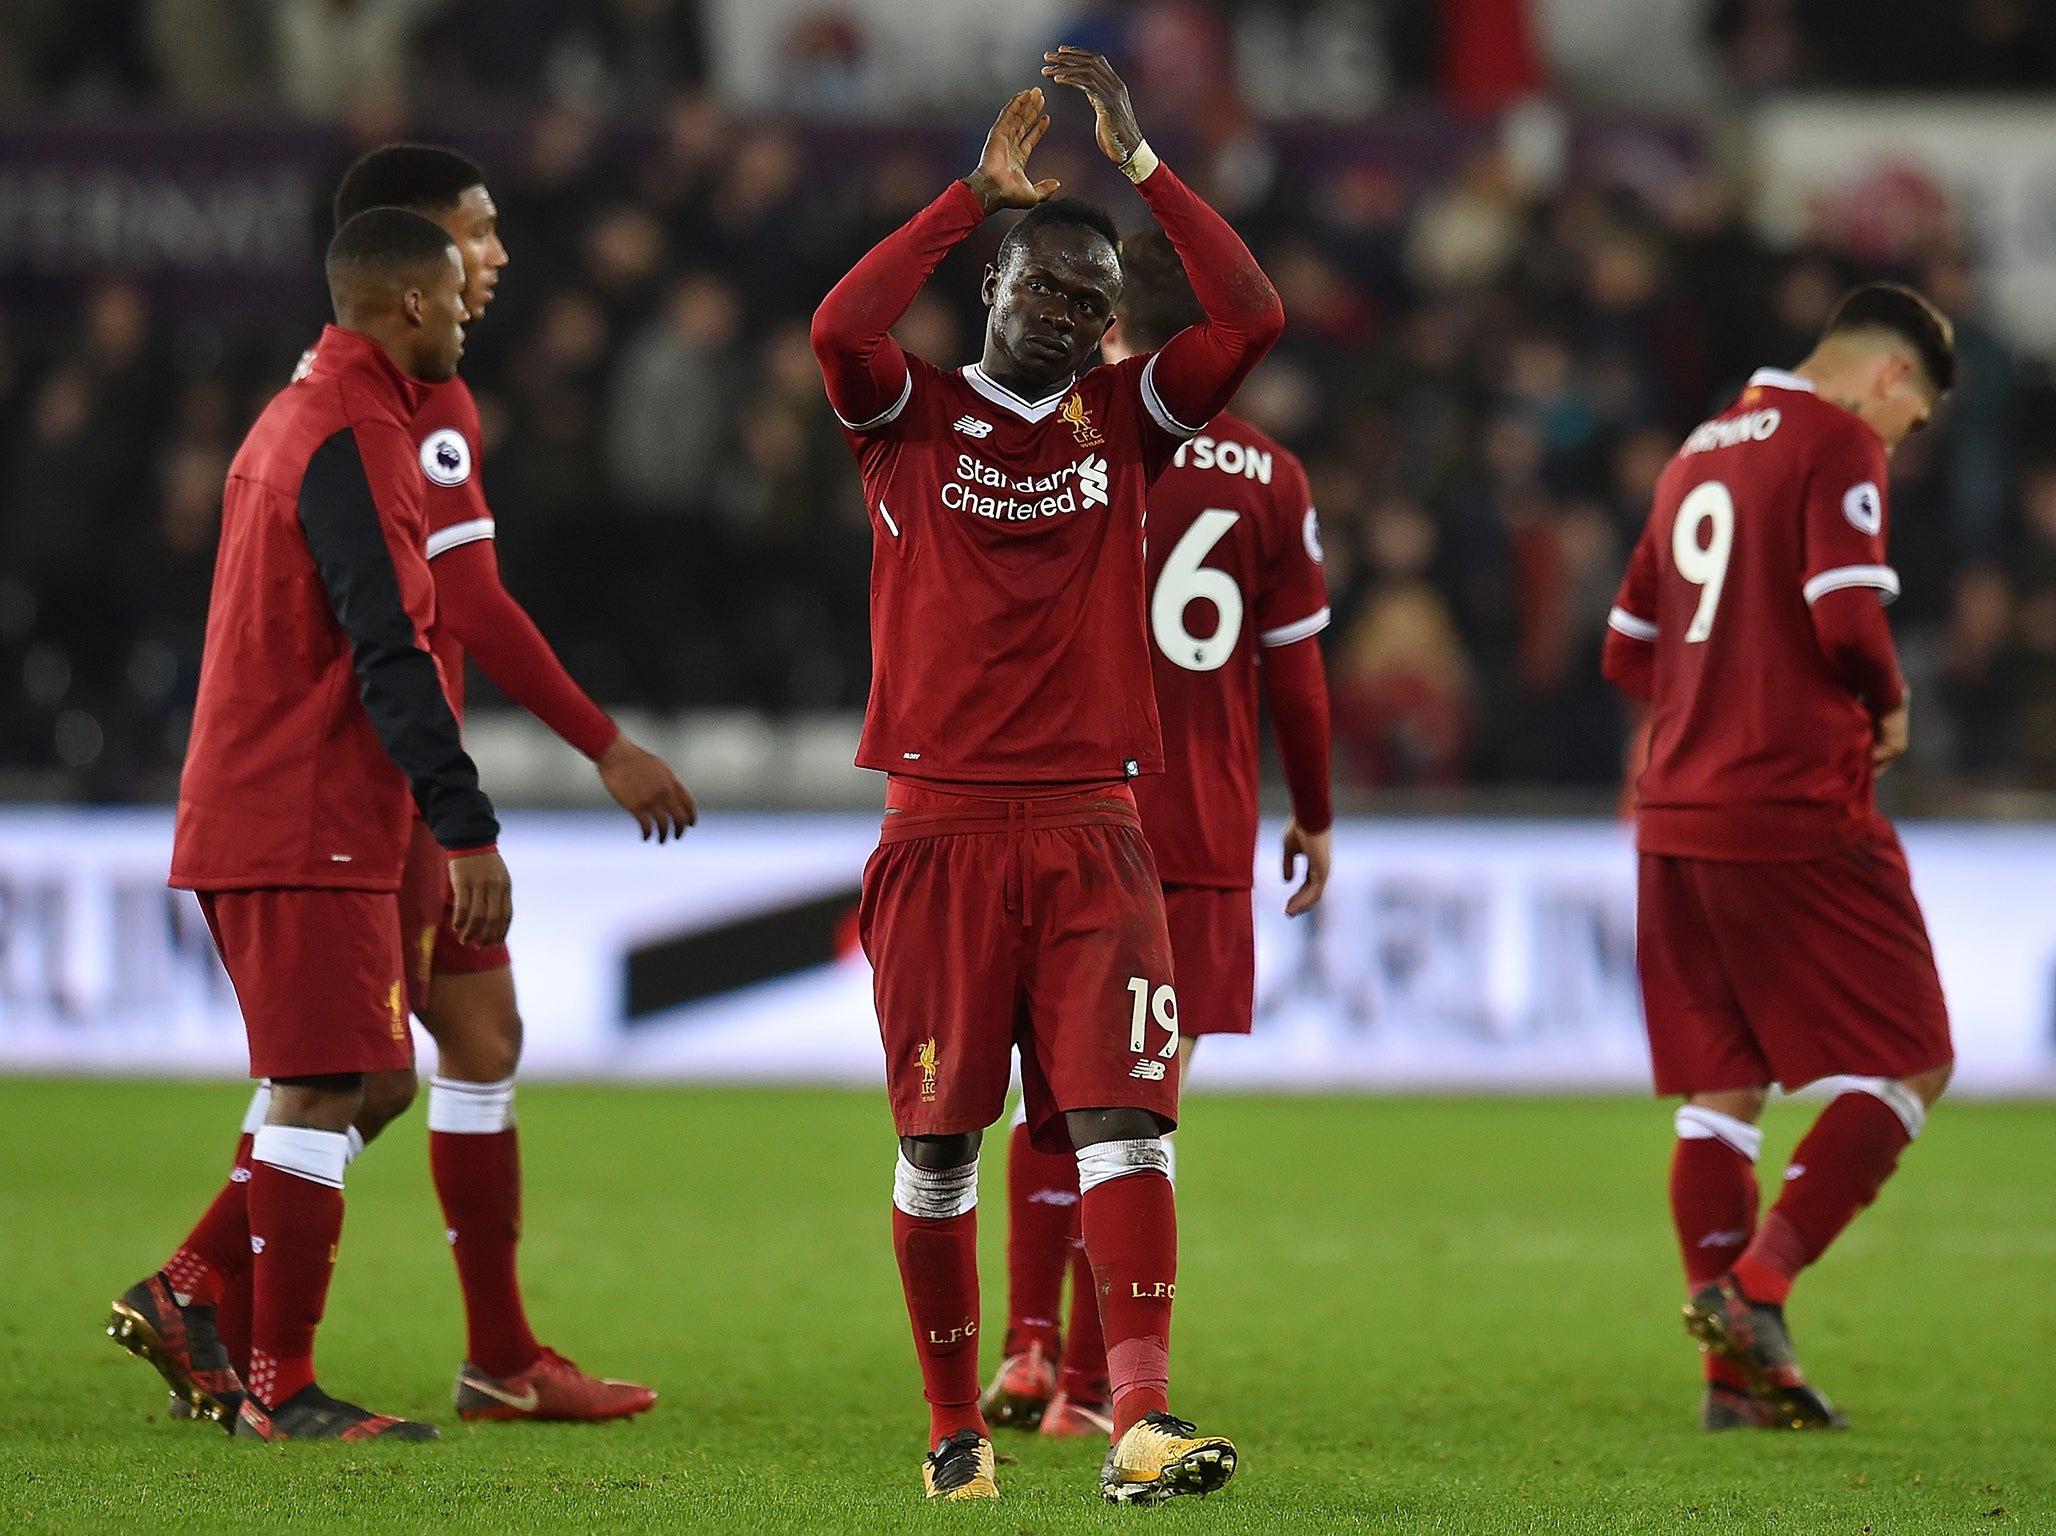 Liverpool were stunned away to Swansea